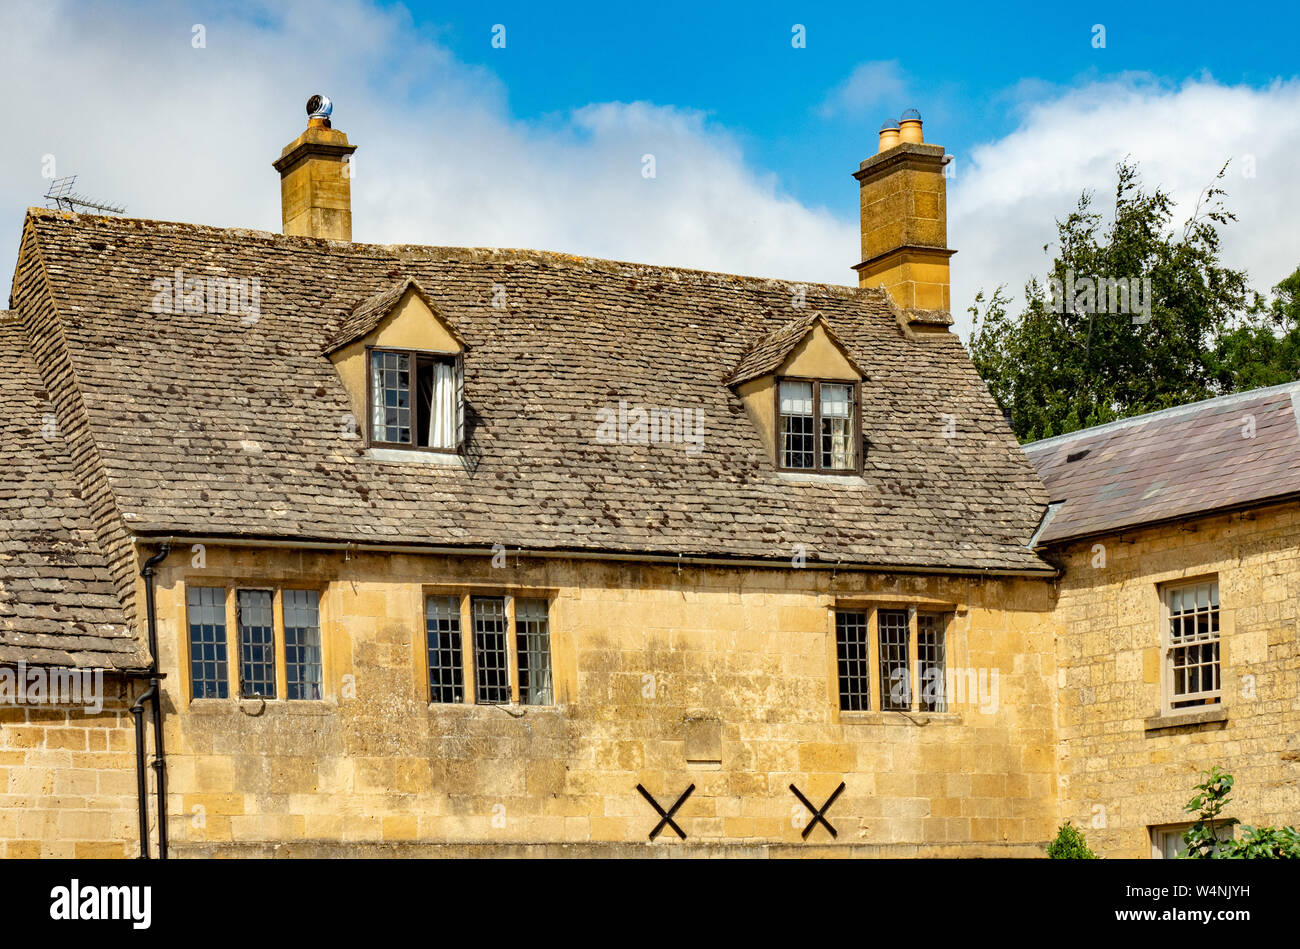 Houses and Rooftops in Chipping Campden, Cotswolds, Gloucestershire, England, United Kingdom, Great Britain, GB, UK Stock Photo